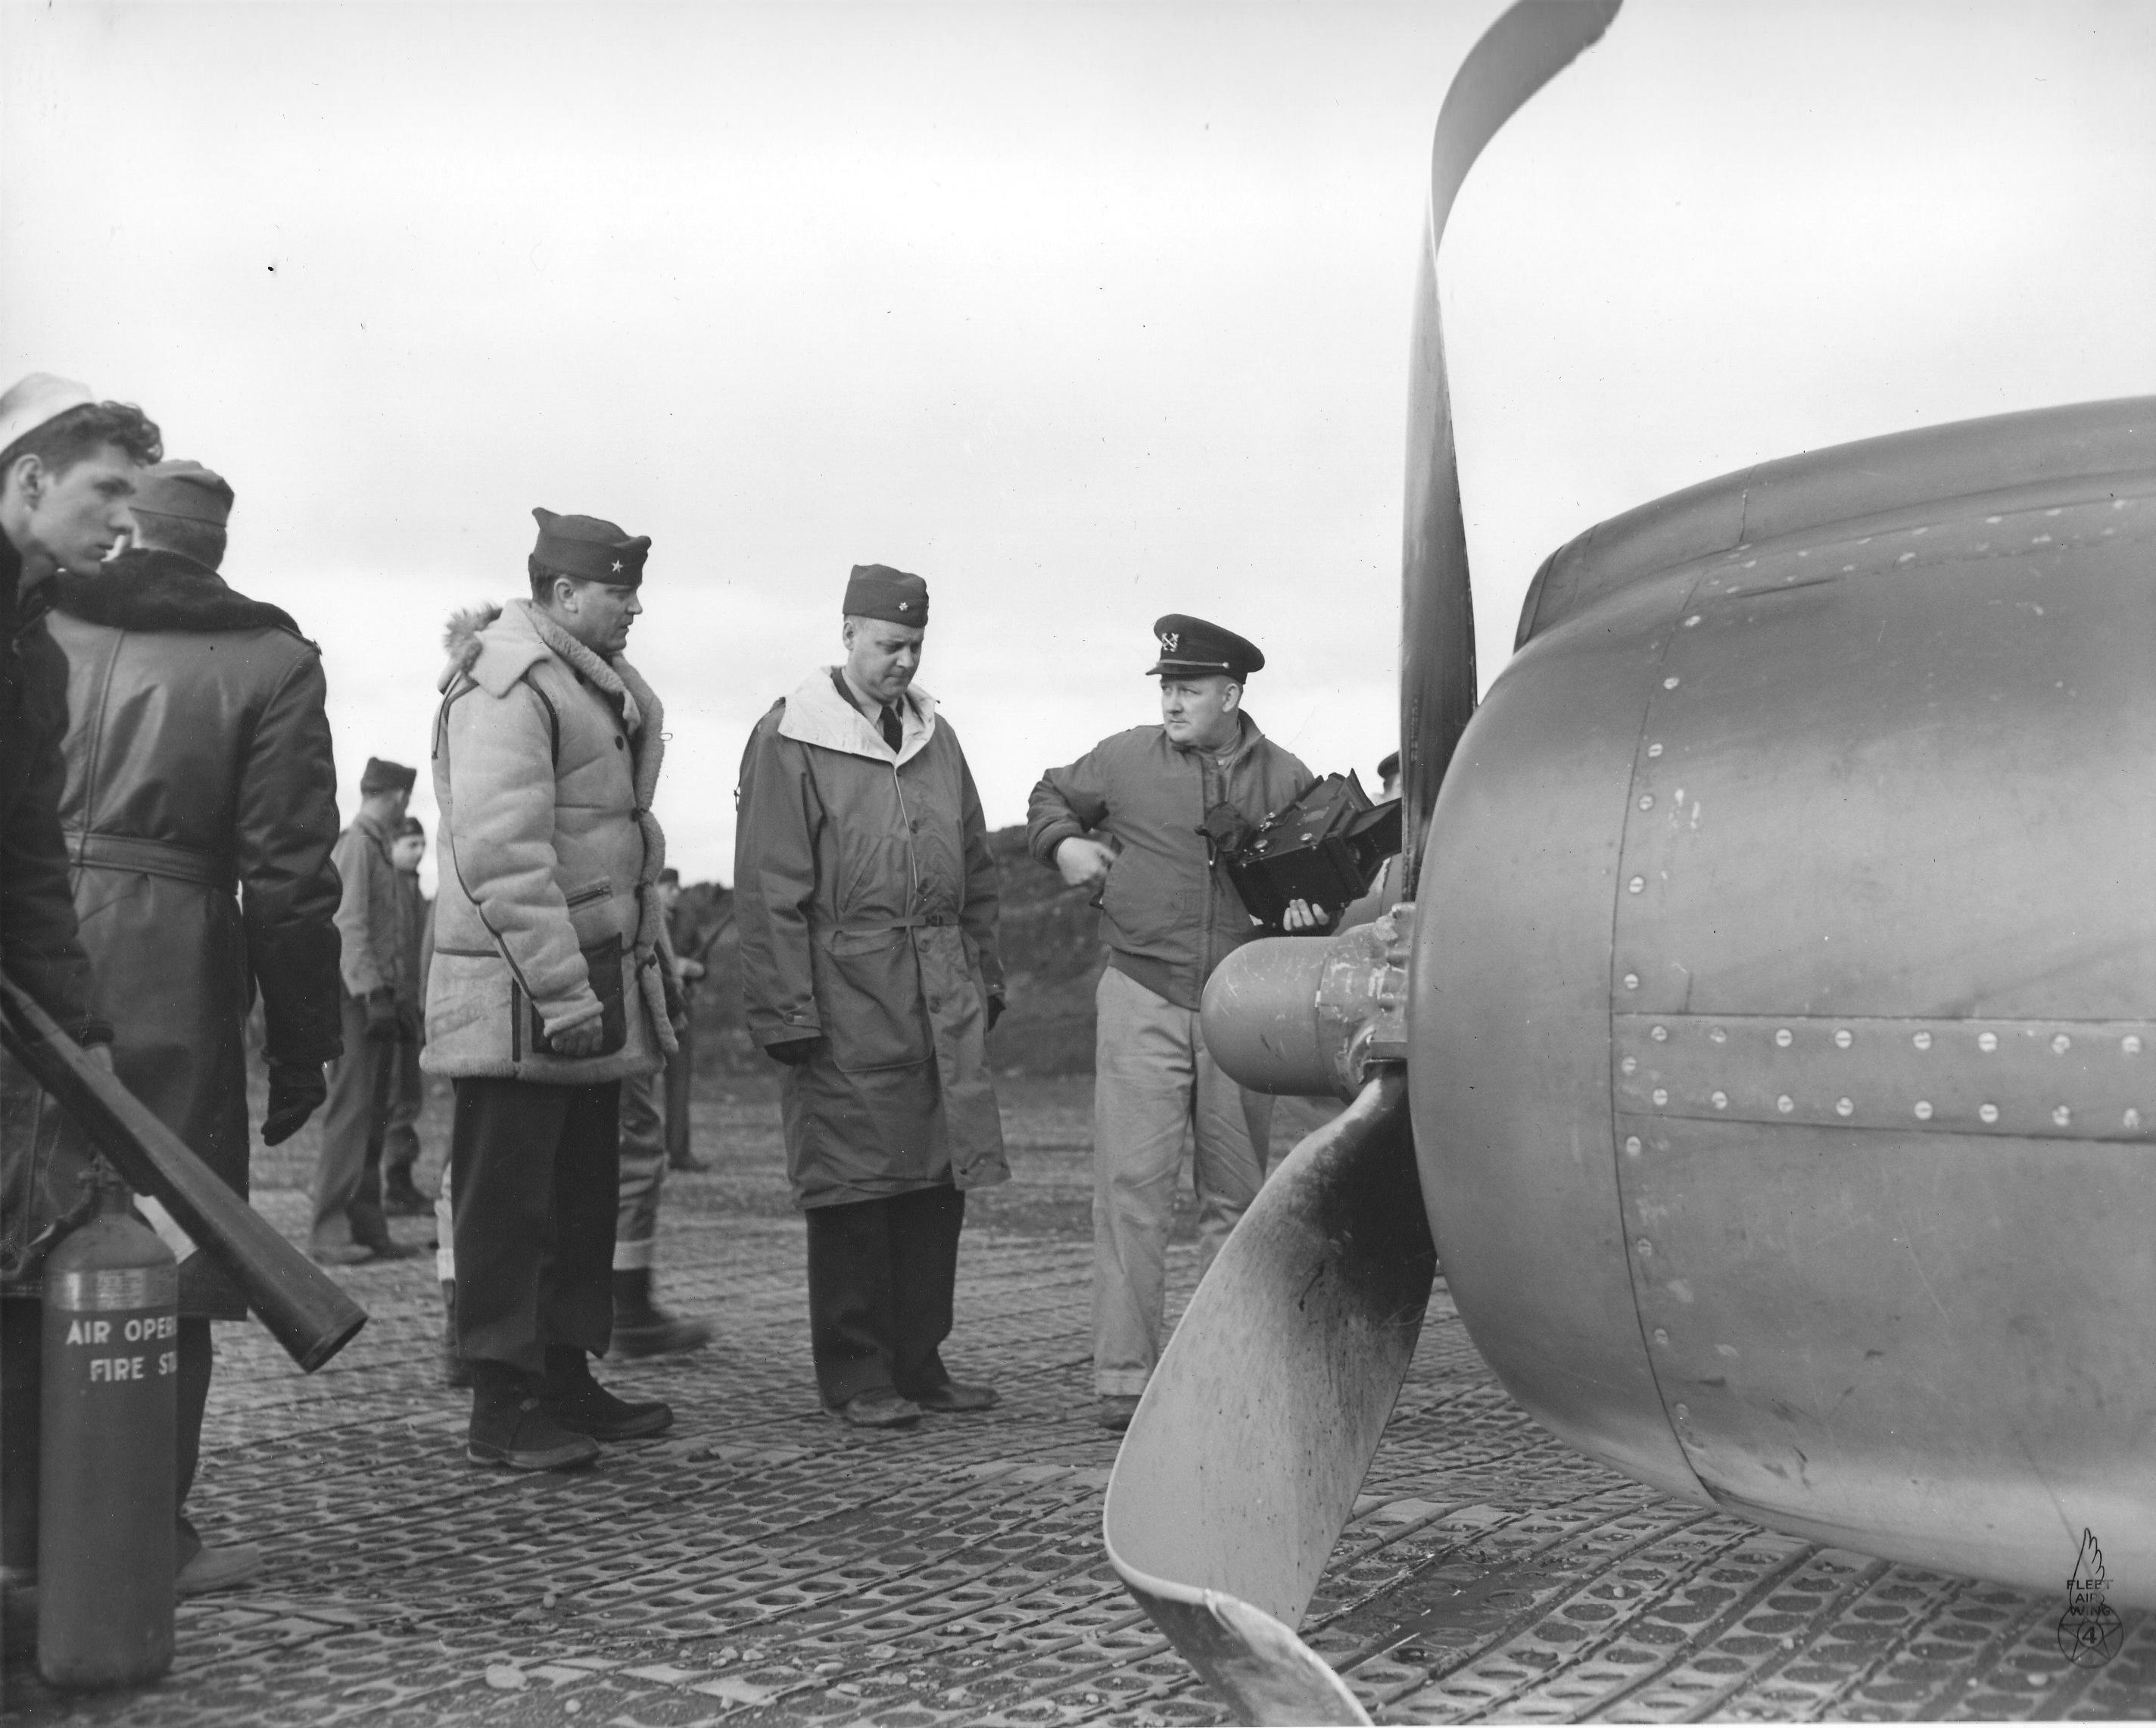 Commodore Leslie Gehres inspecting a PV-1 Ventura of Bombing Squadron VB-139 after a belly landing on Attu Island, Alaska, 18 May 1944. Note the Marsden Matting runway surface